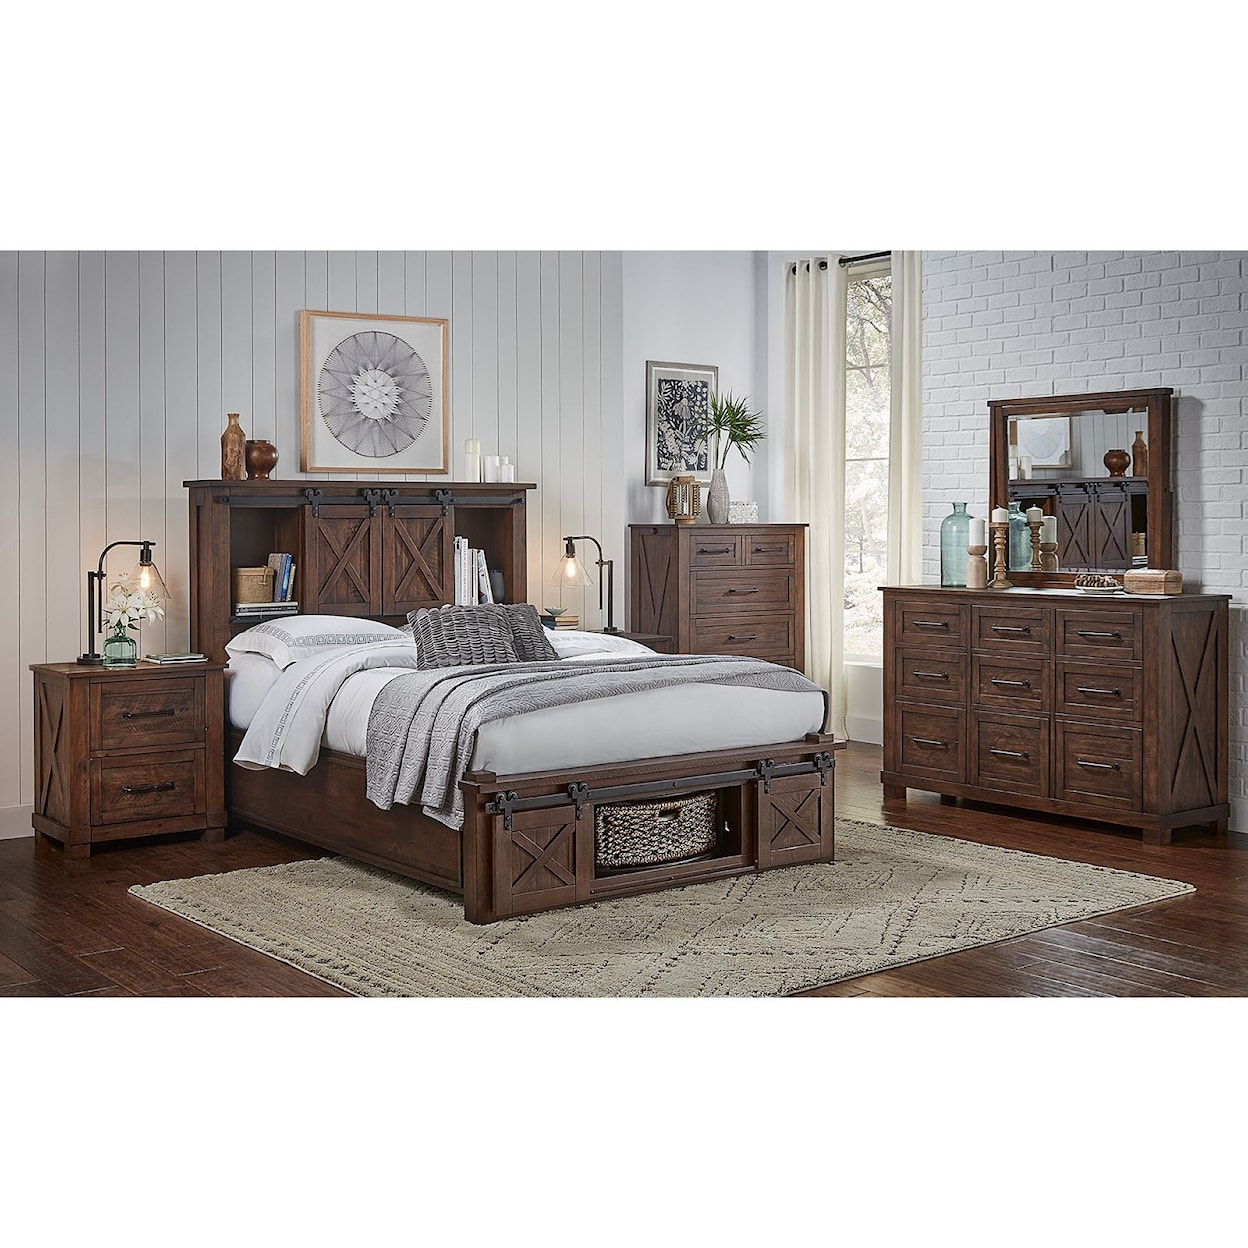 A-A Sun Valley King Bedroom Group